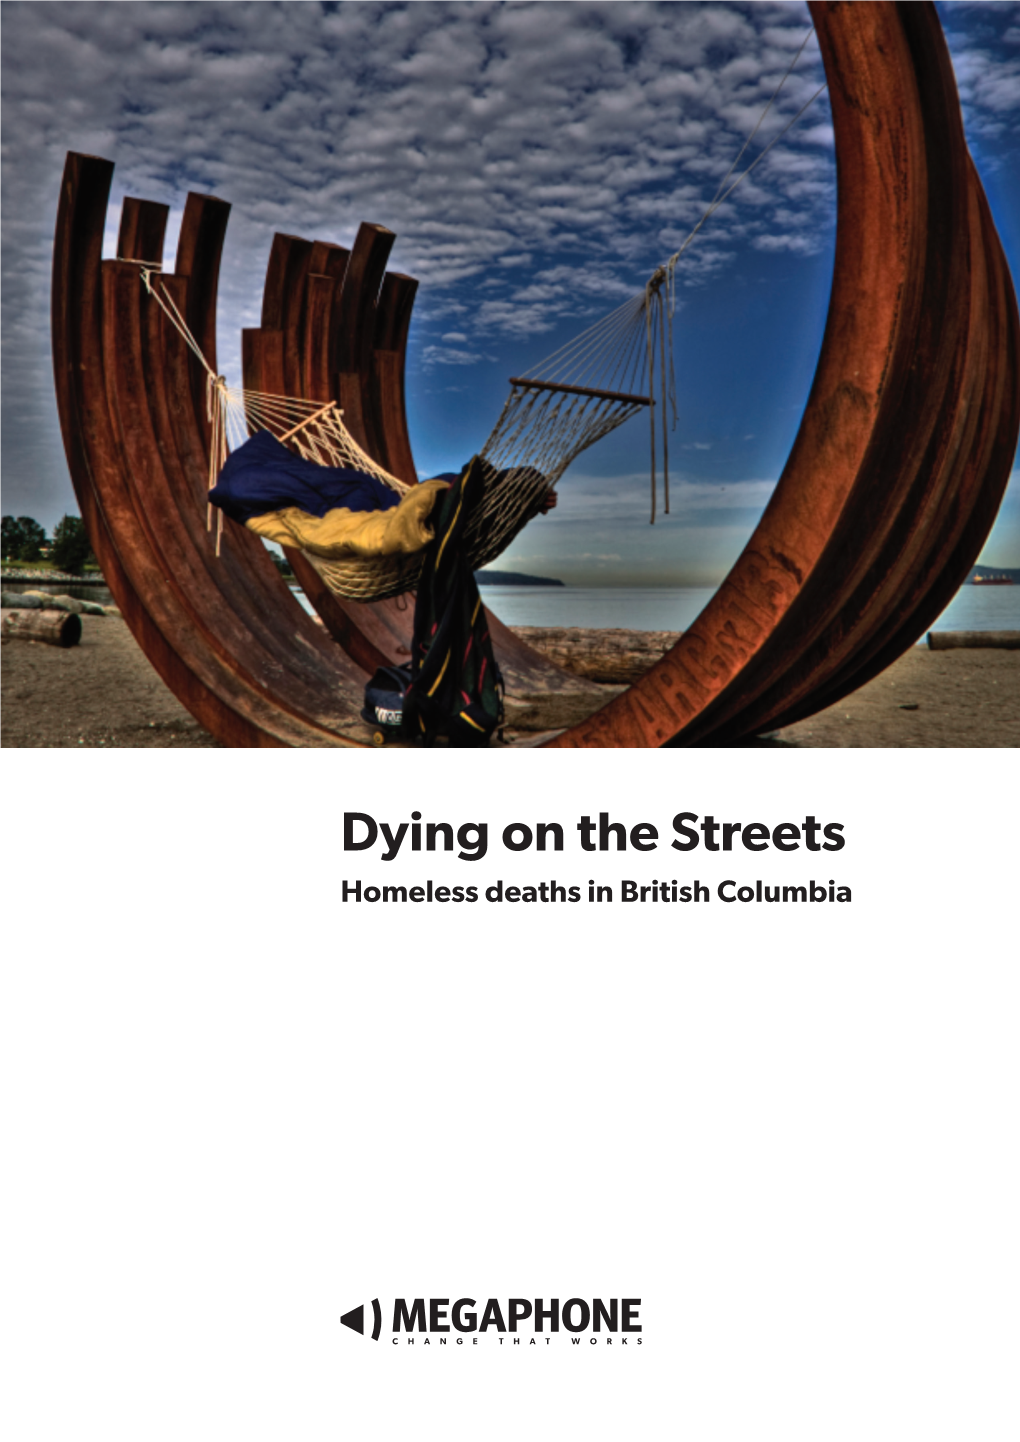 Dying on the Streets: Homeless Deaths in British Columbia